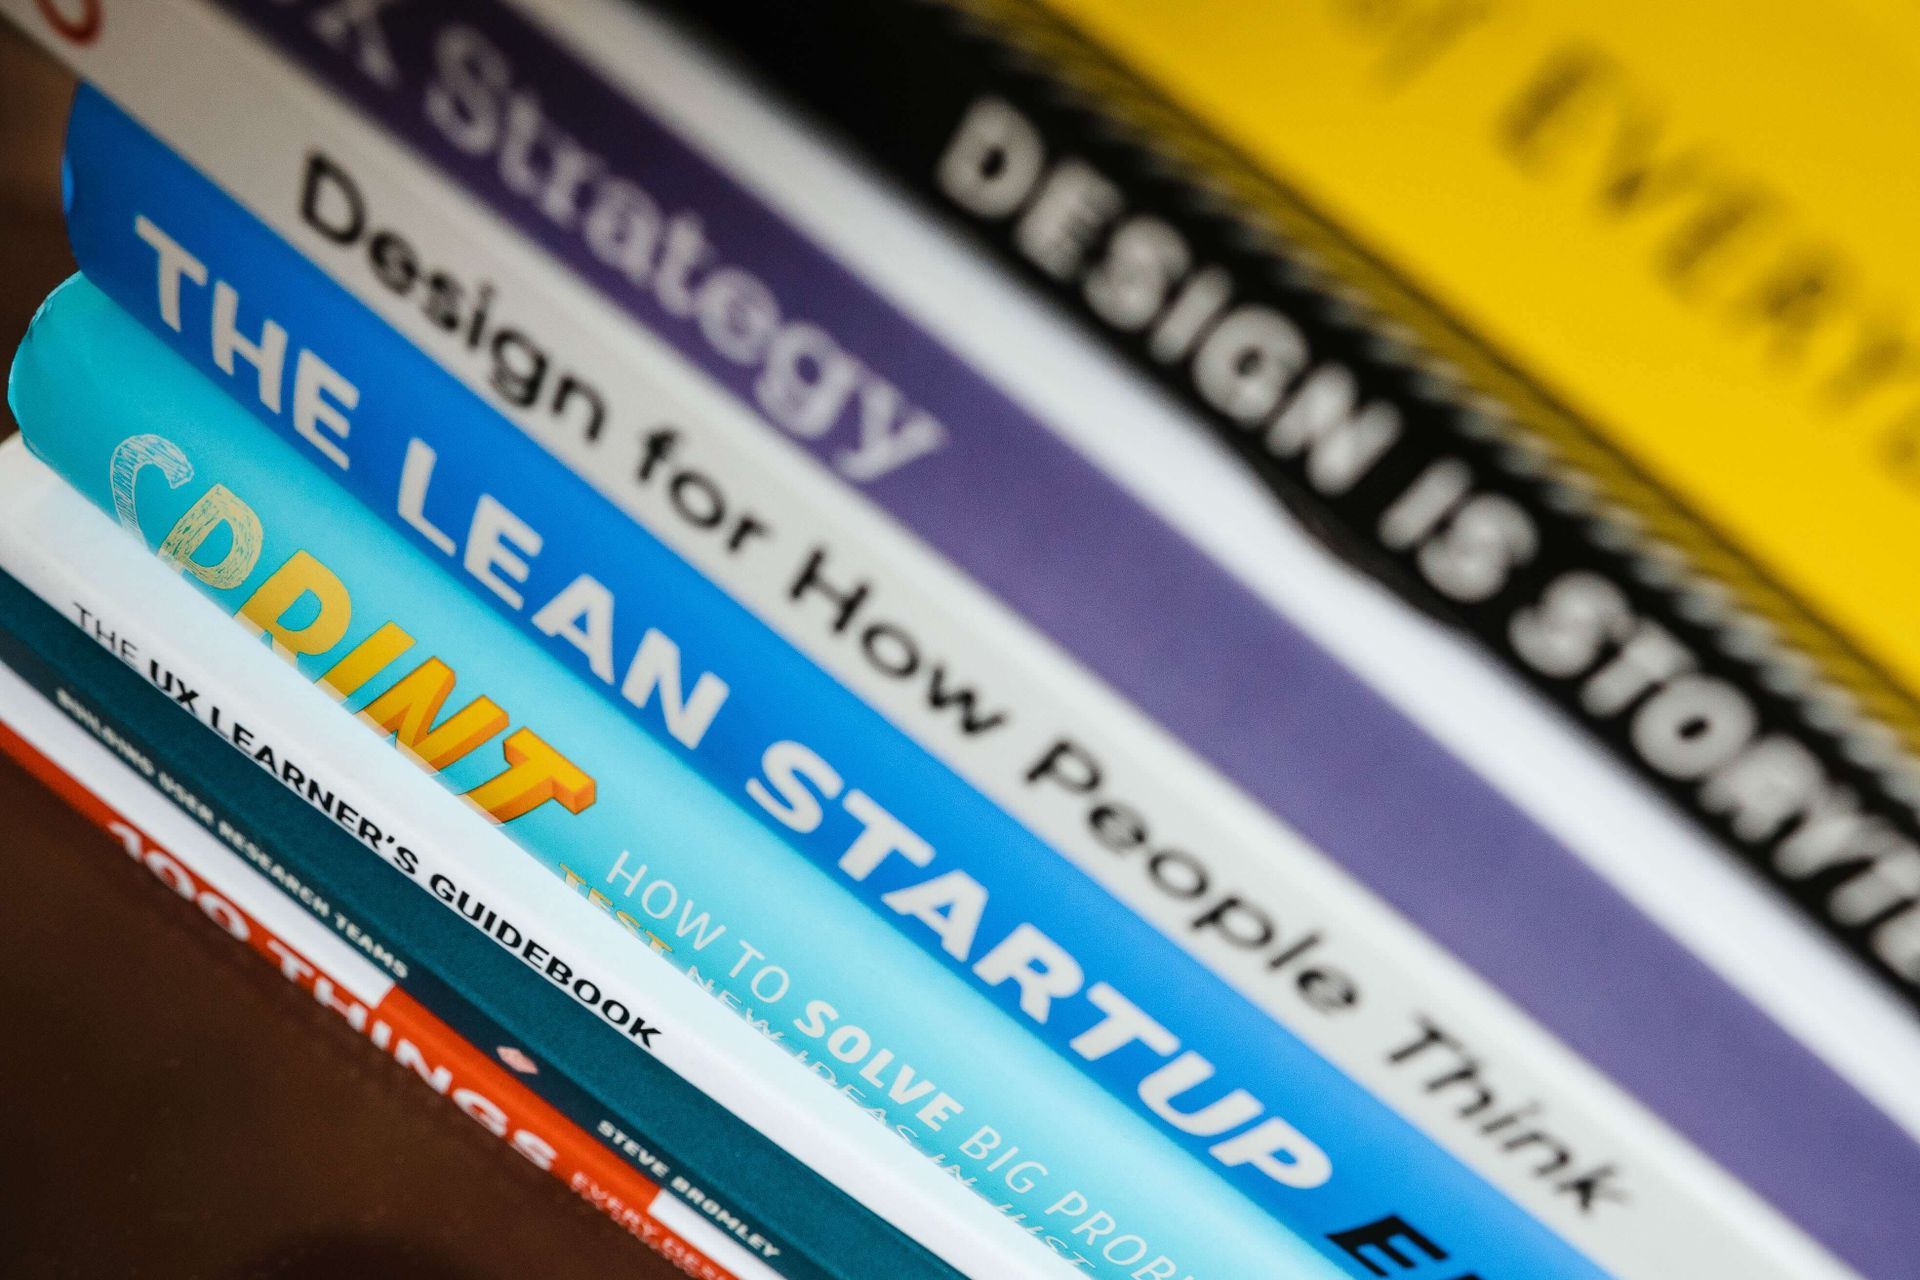 Lean UX Design - Gain accreditation with Interaction Design Foundation